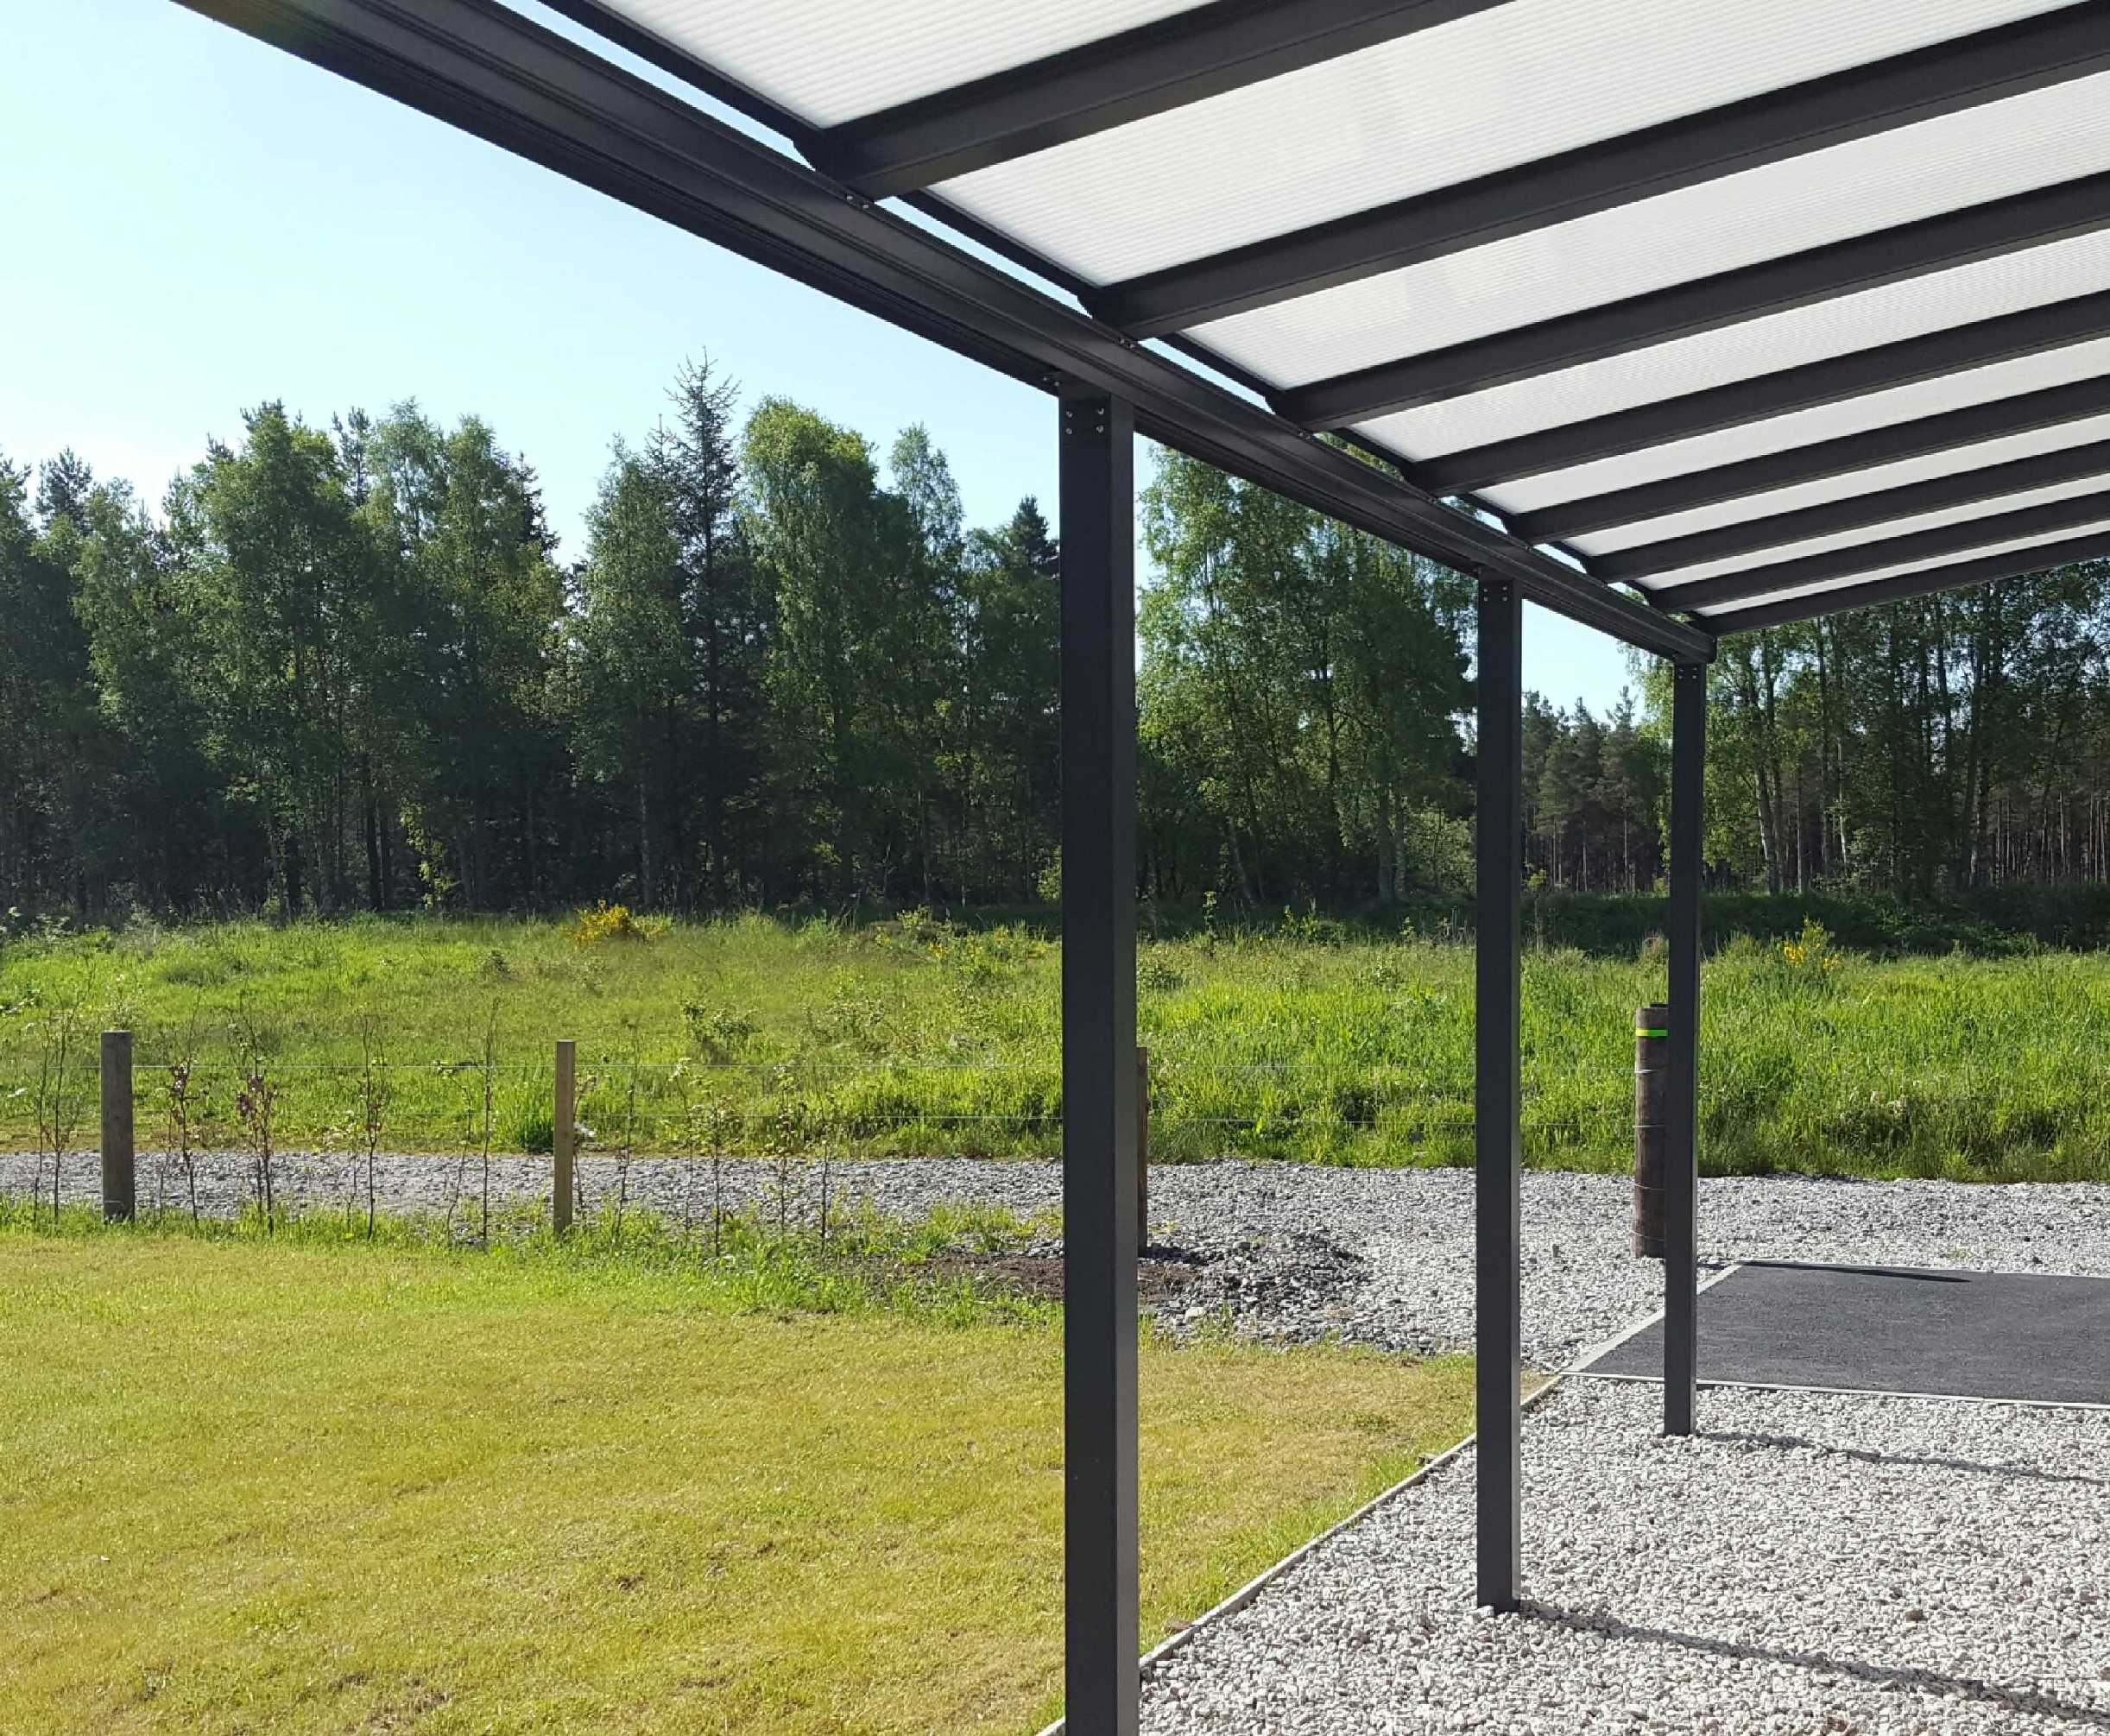 Omega Smart Lean-To Canopy, Anthracite Grey, 6mm Glass Clear Plate Polycarbonate Glazing - 6.3m (W) x 1.5m (P), (4) Supporting Posts